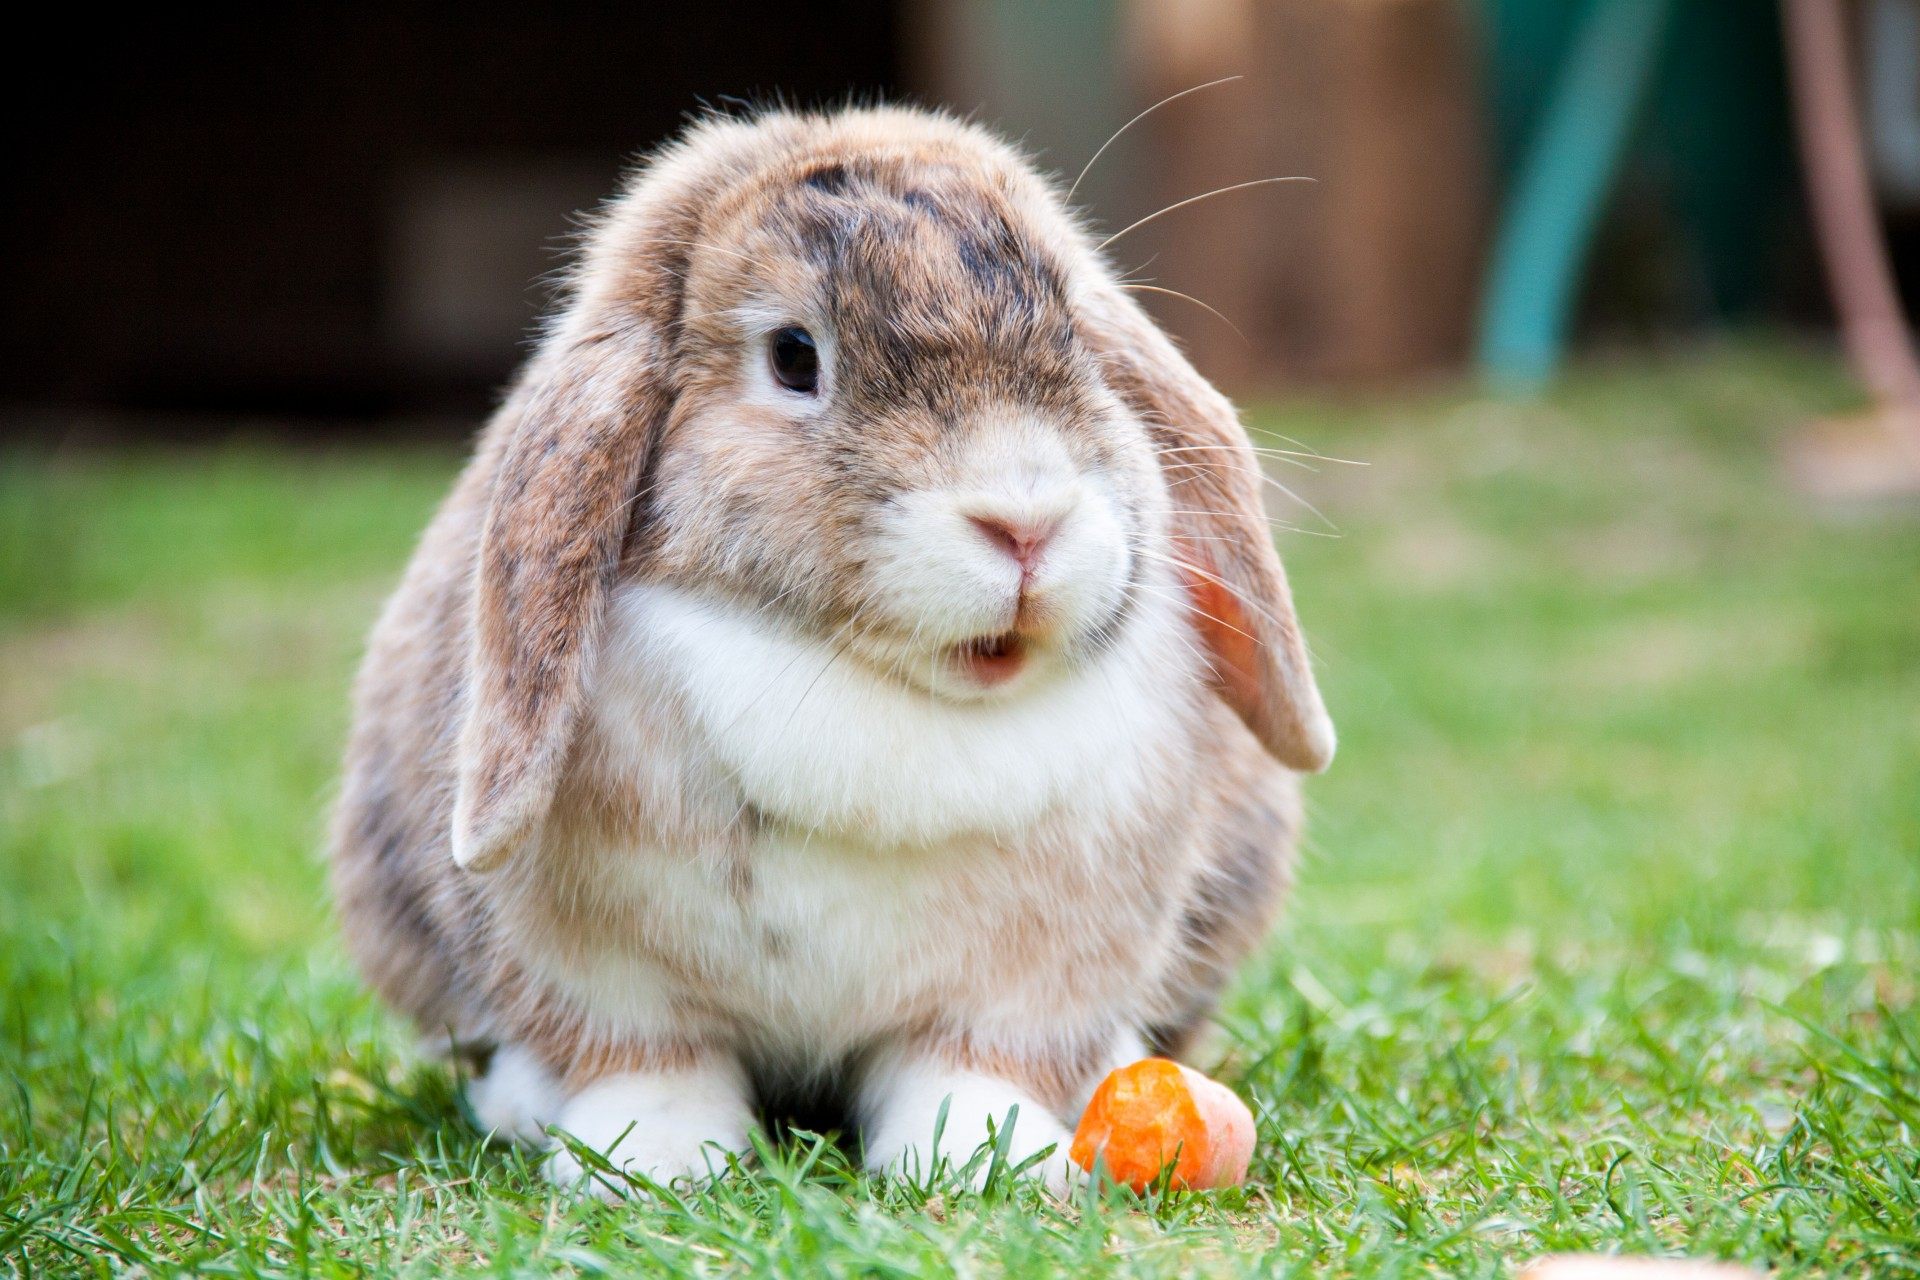 What We Thought We Knew About Bunnies Was Wrong - Atlas Obscura